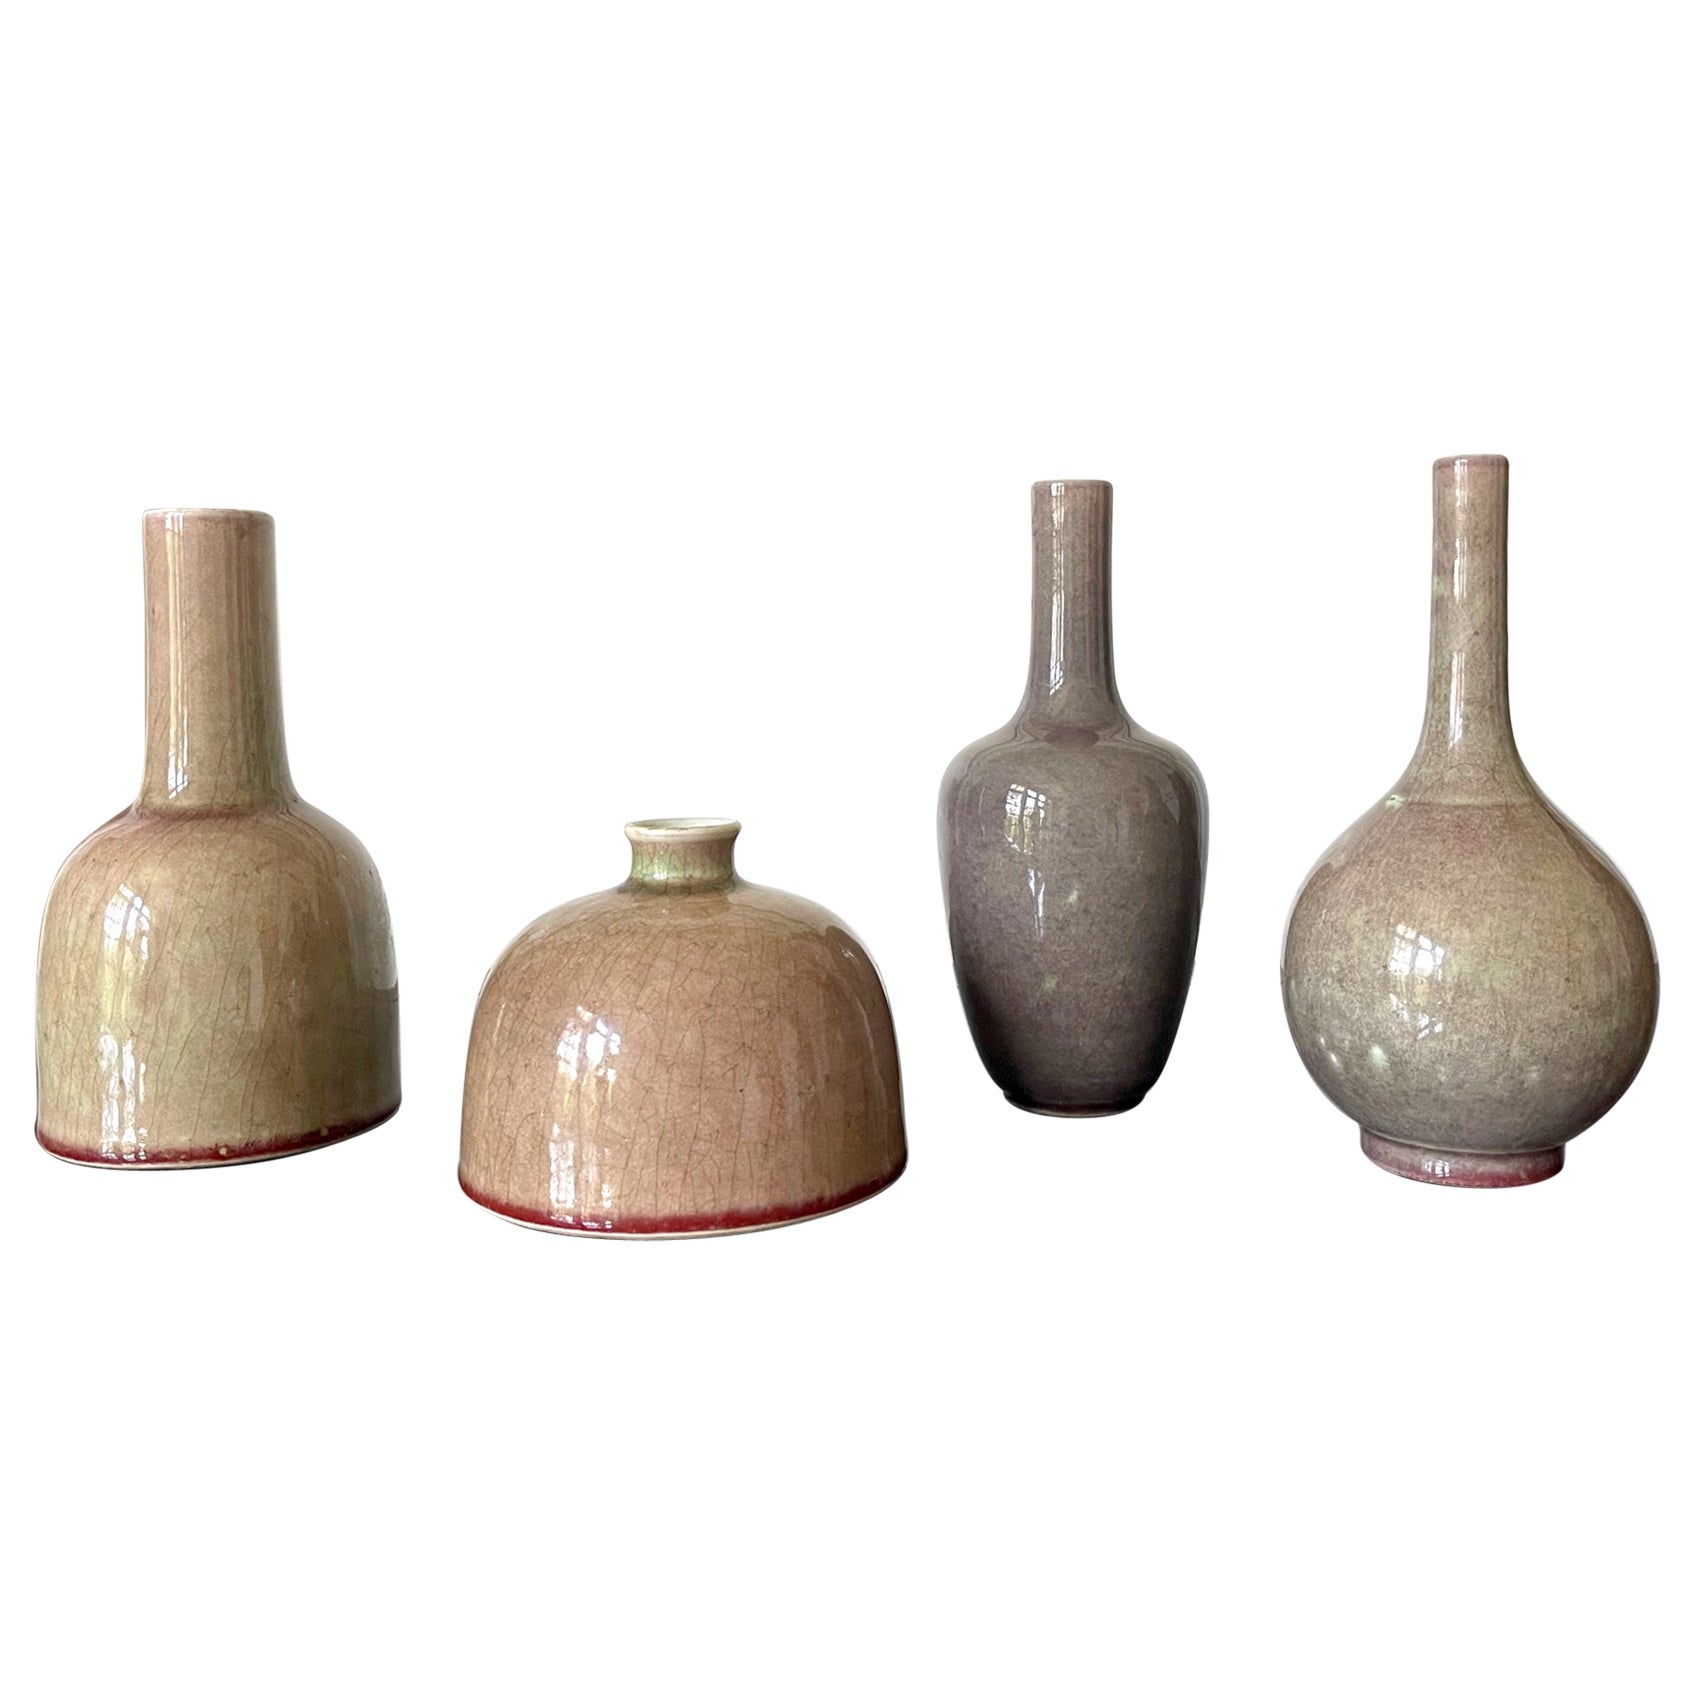 Collection of Four Chinese Ceramic Vases with Peachbloom Glaze